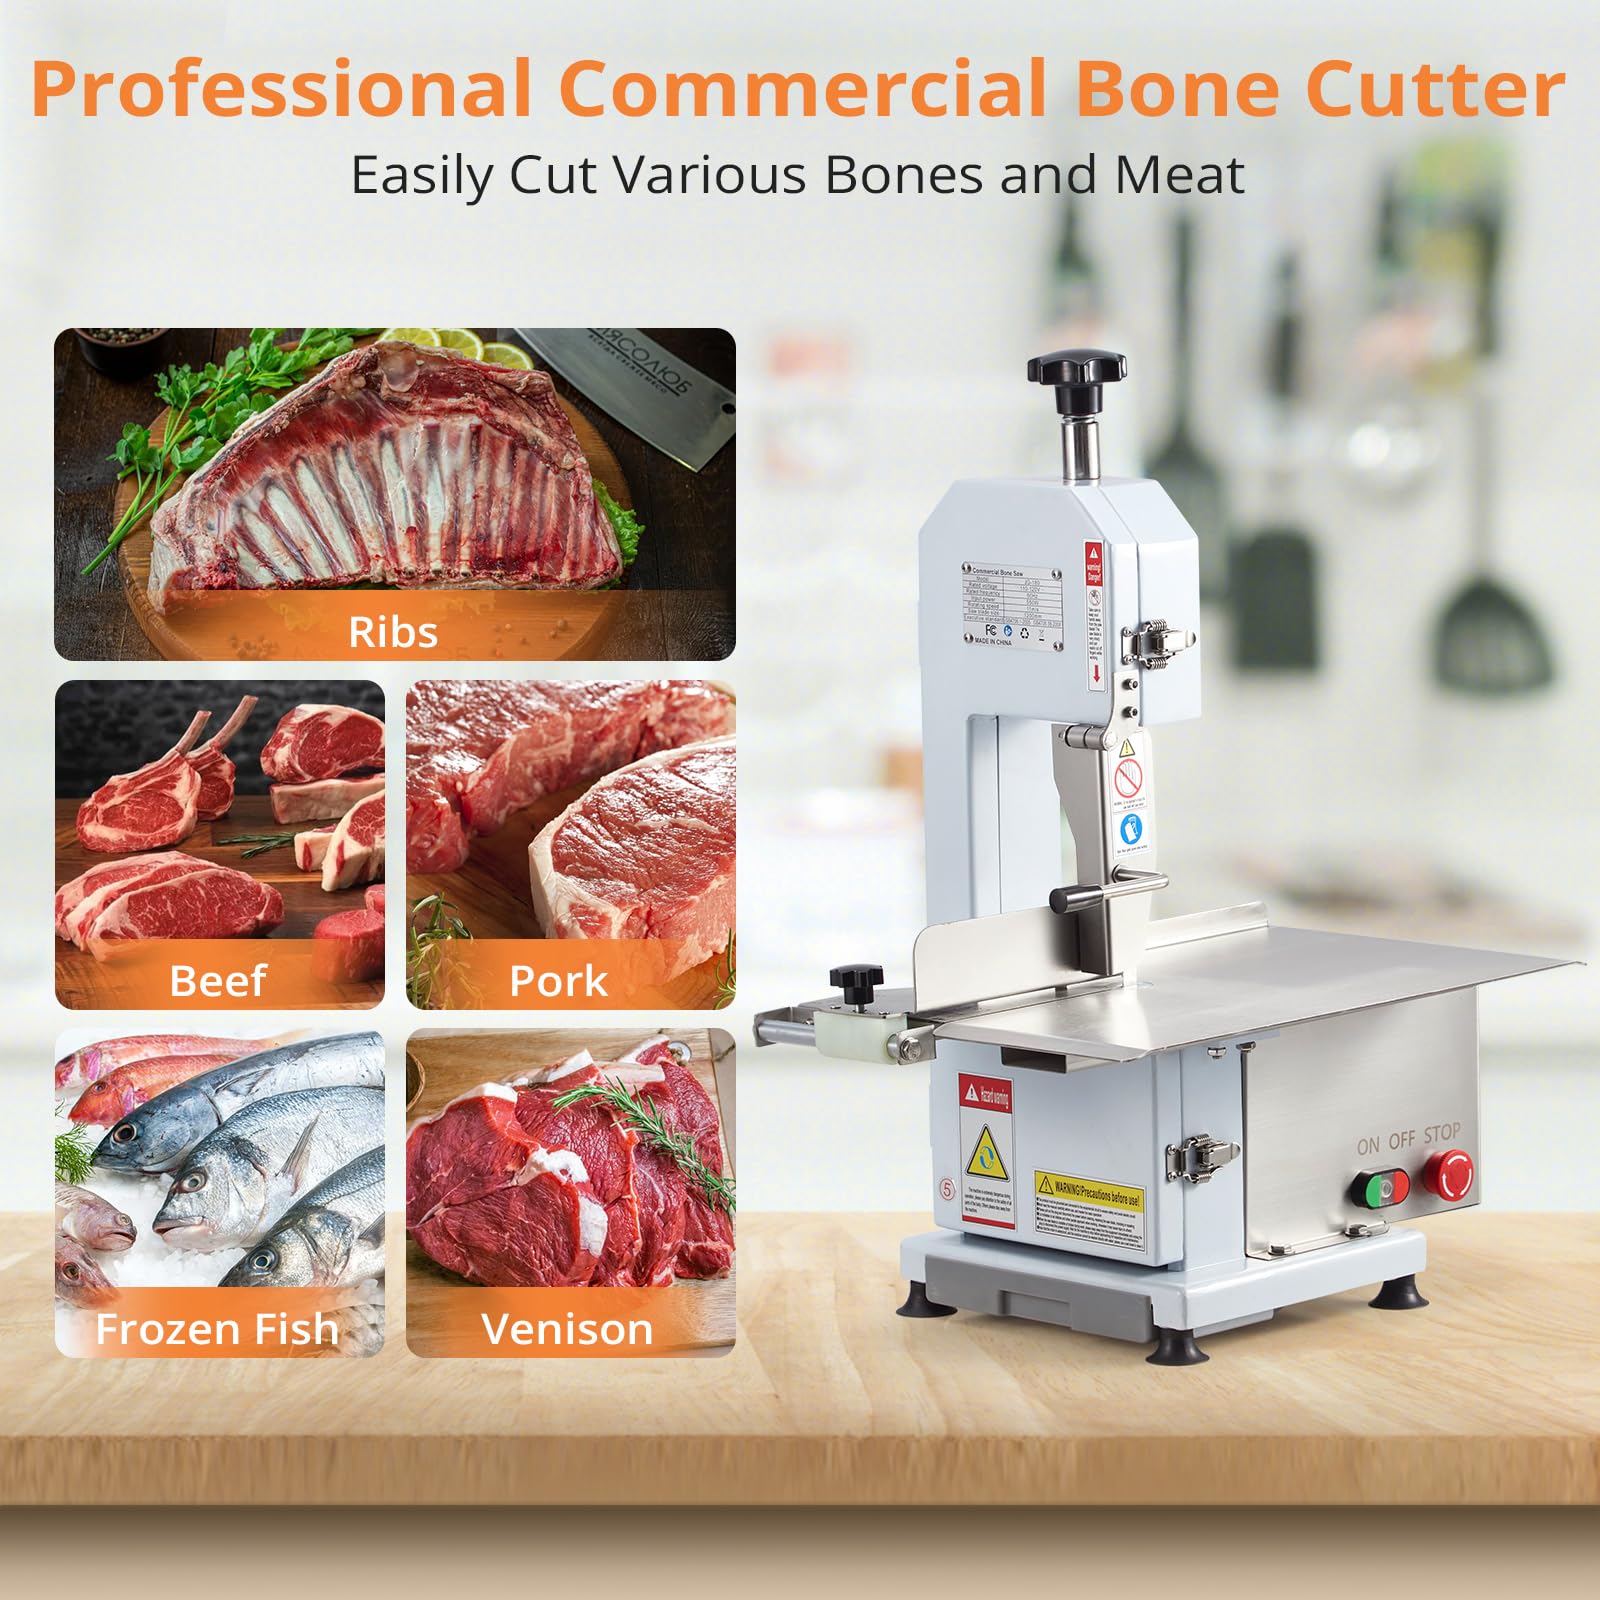 550W Butchering Meat Saw, Adjustable 0.39～5.7" Cut Thickness